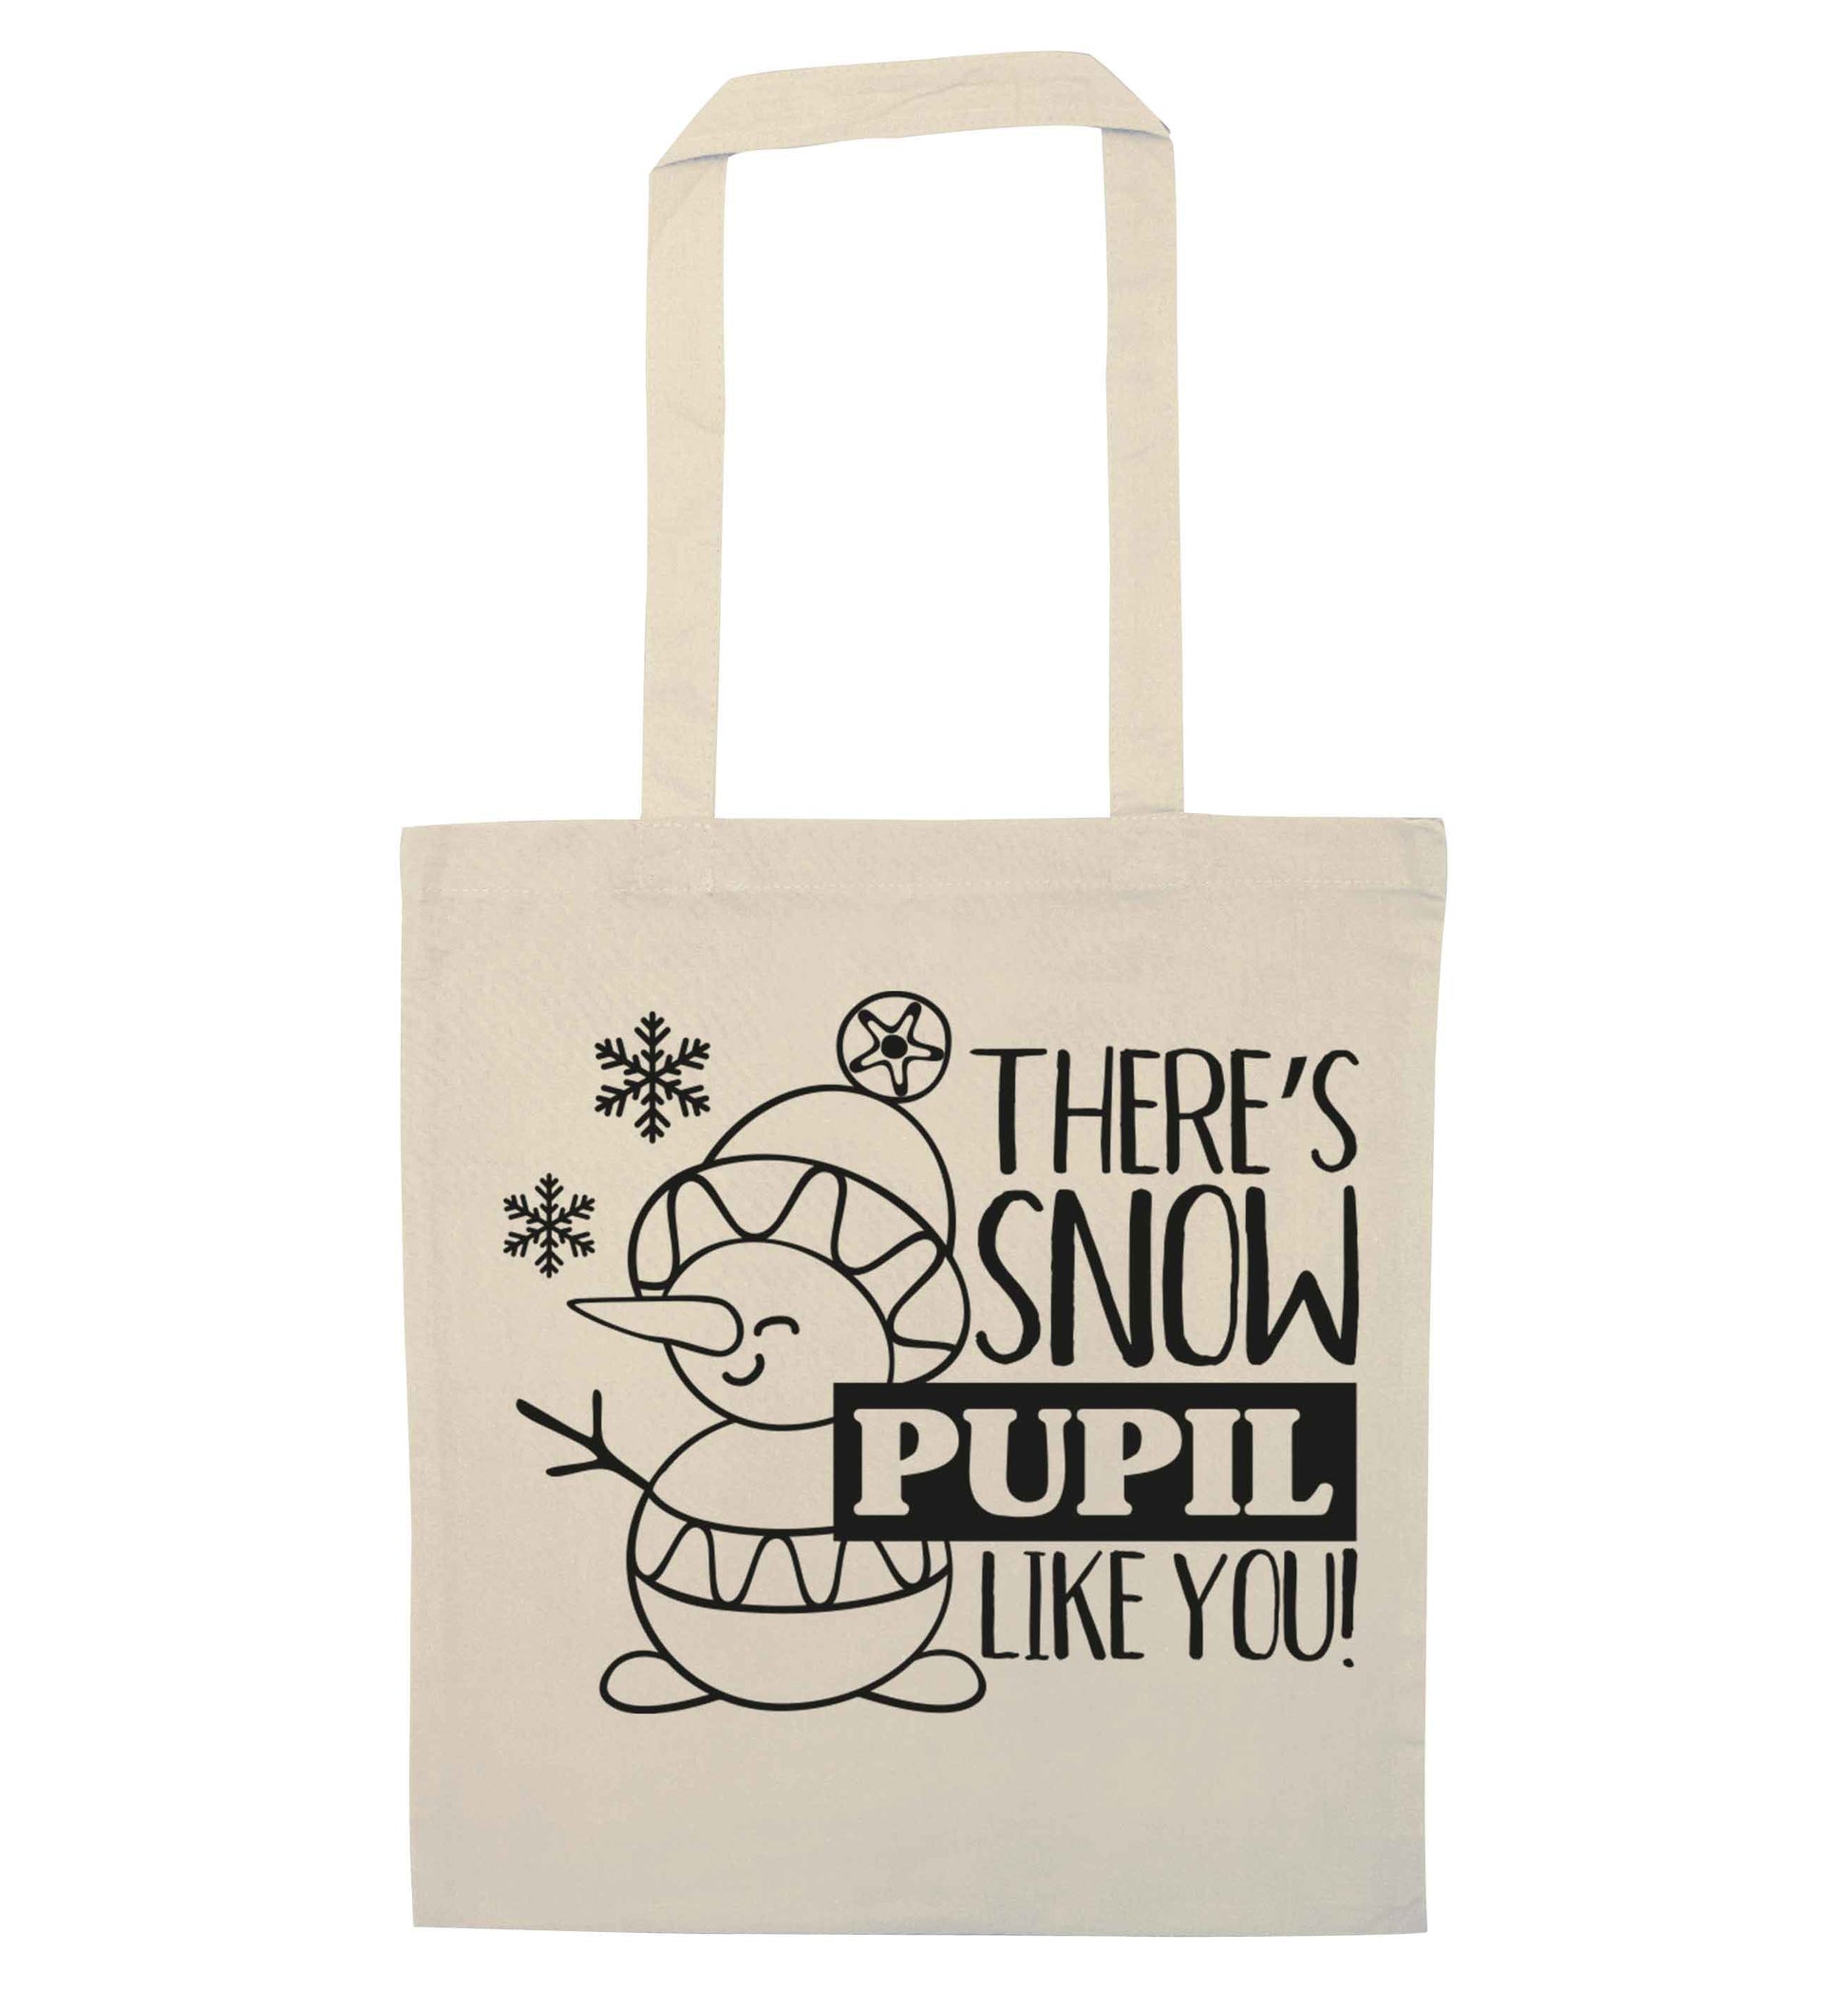 There's snow pupil like you natural tote bag